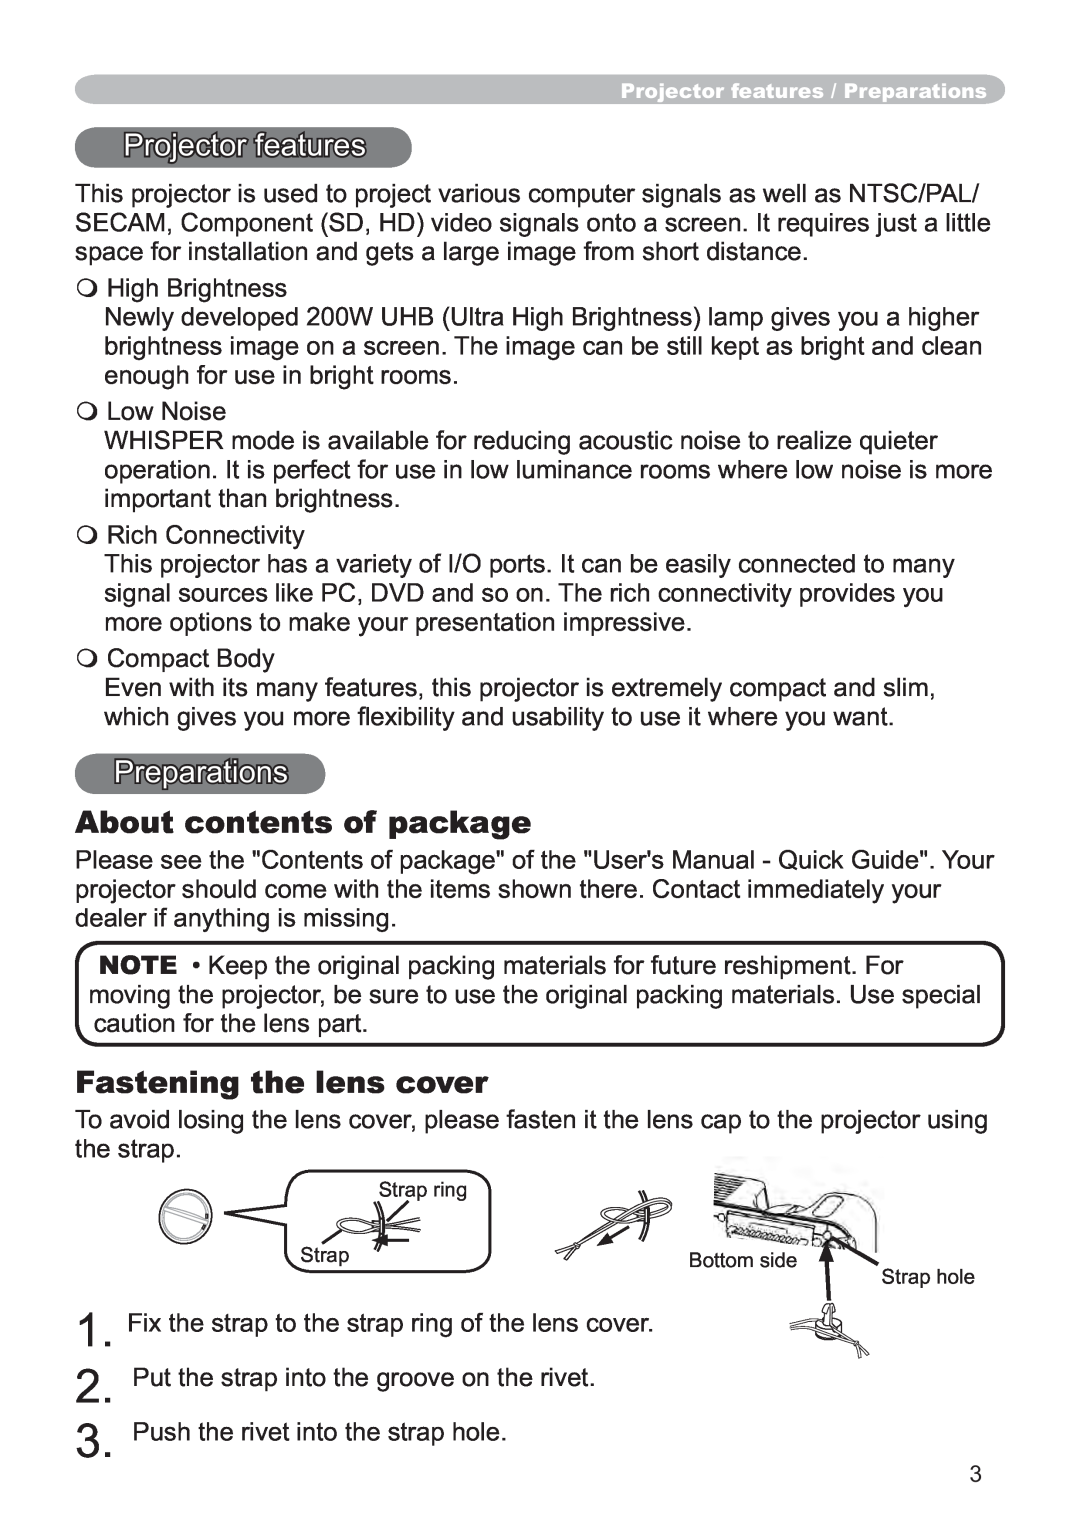 Hitachi CP-X251 user manual Projector features, Preparations, About contents of package, Fastening the lens cover 